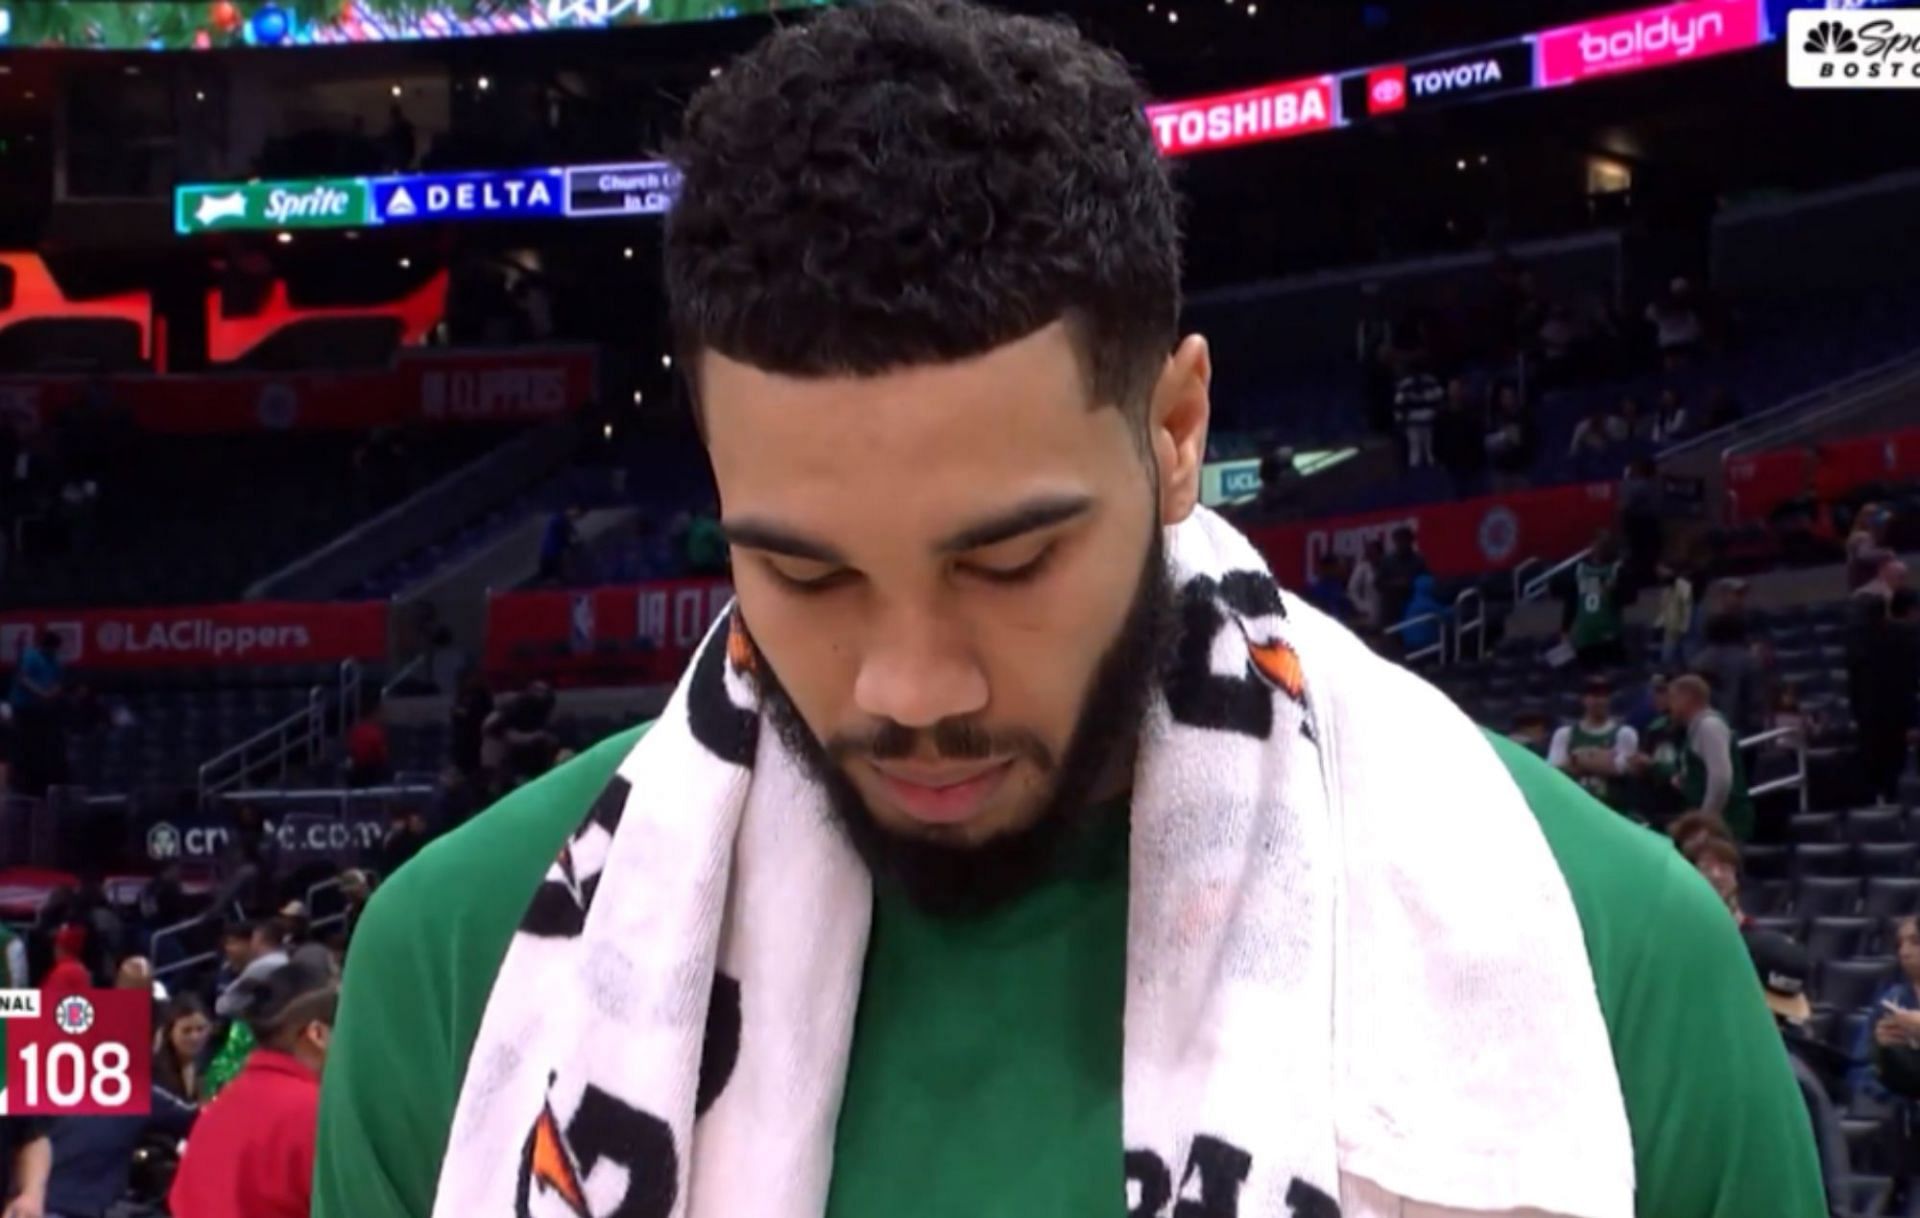 The Boston Celtics had a brief scare as Jayson Tatum reinjures his ankle during the LA Clippers matchup